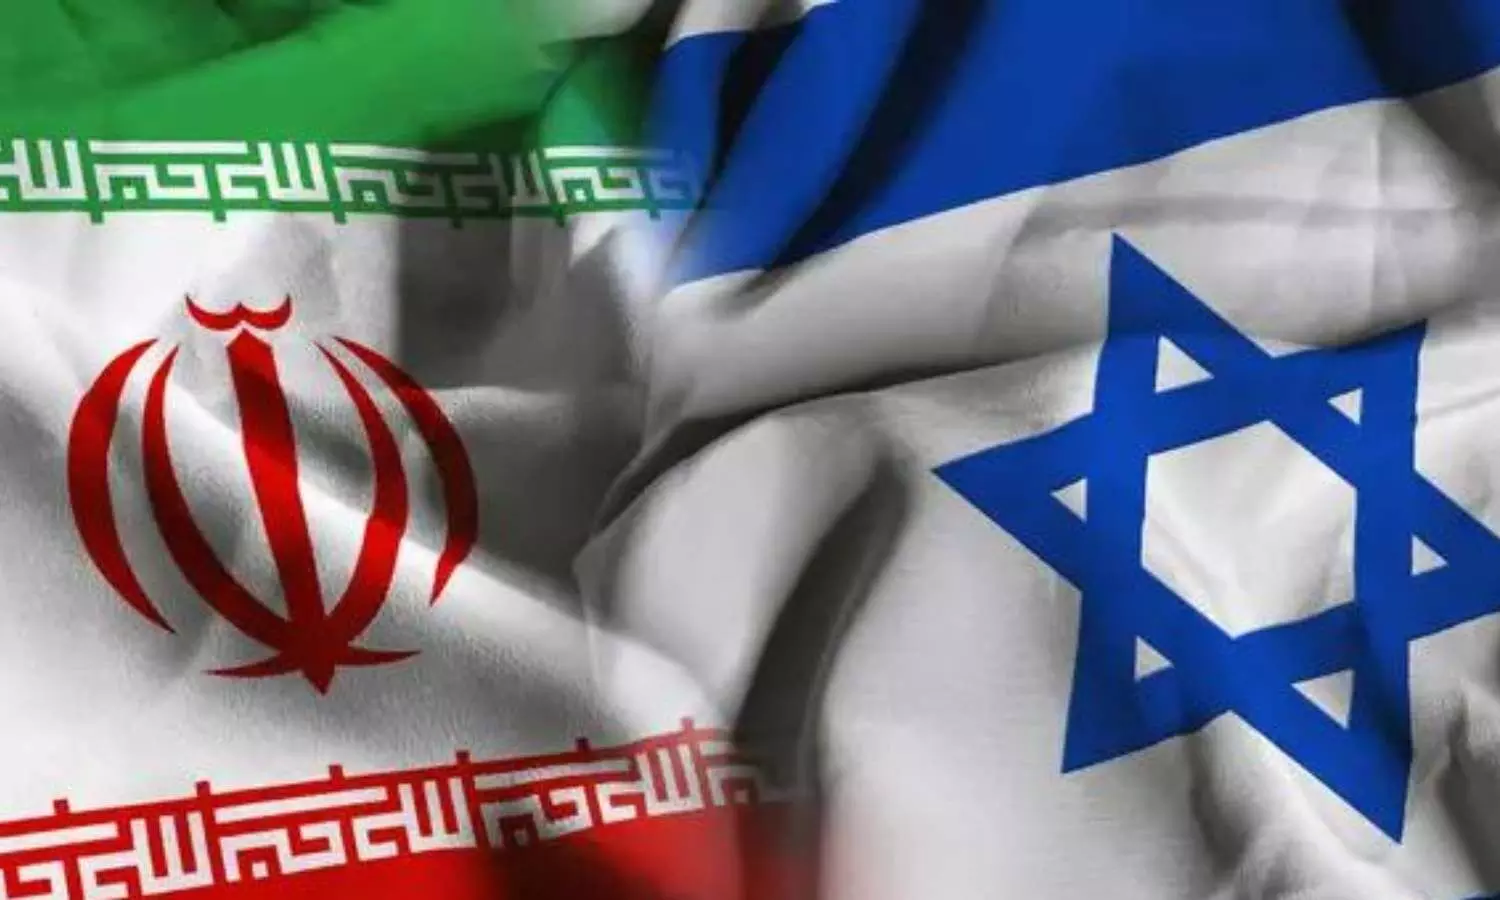 Israel-Iran Tension May Spike Oil, LNG Prices Impact Indian Markets